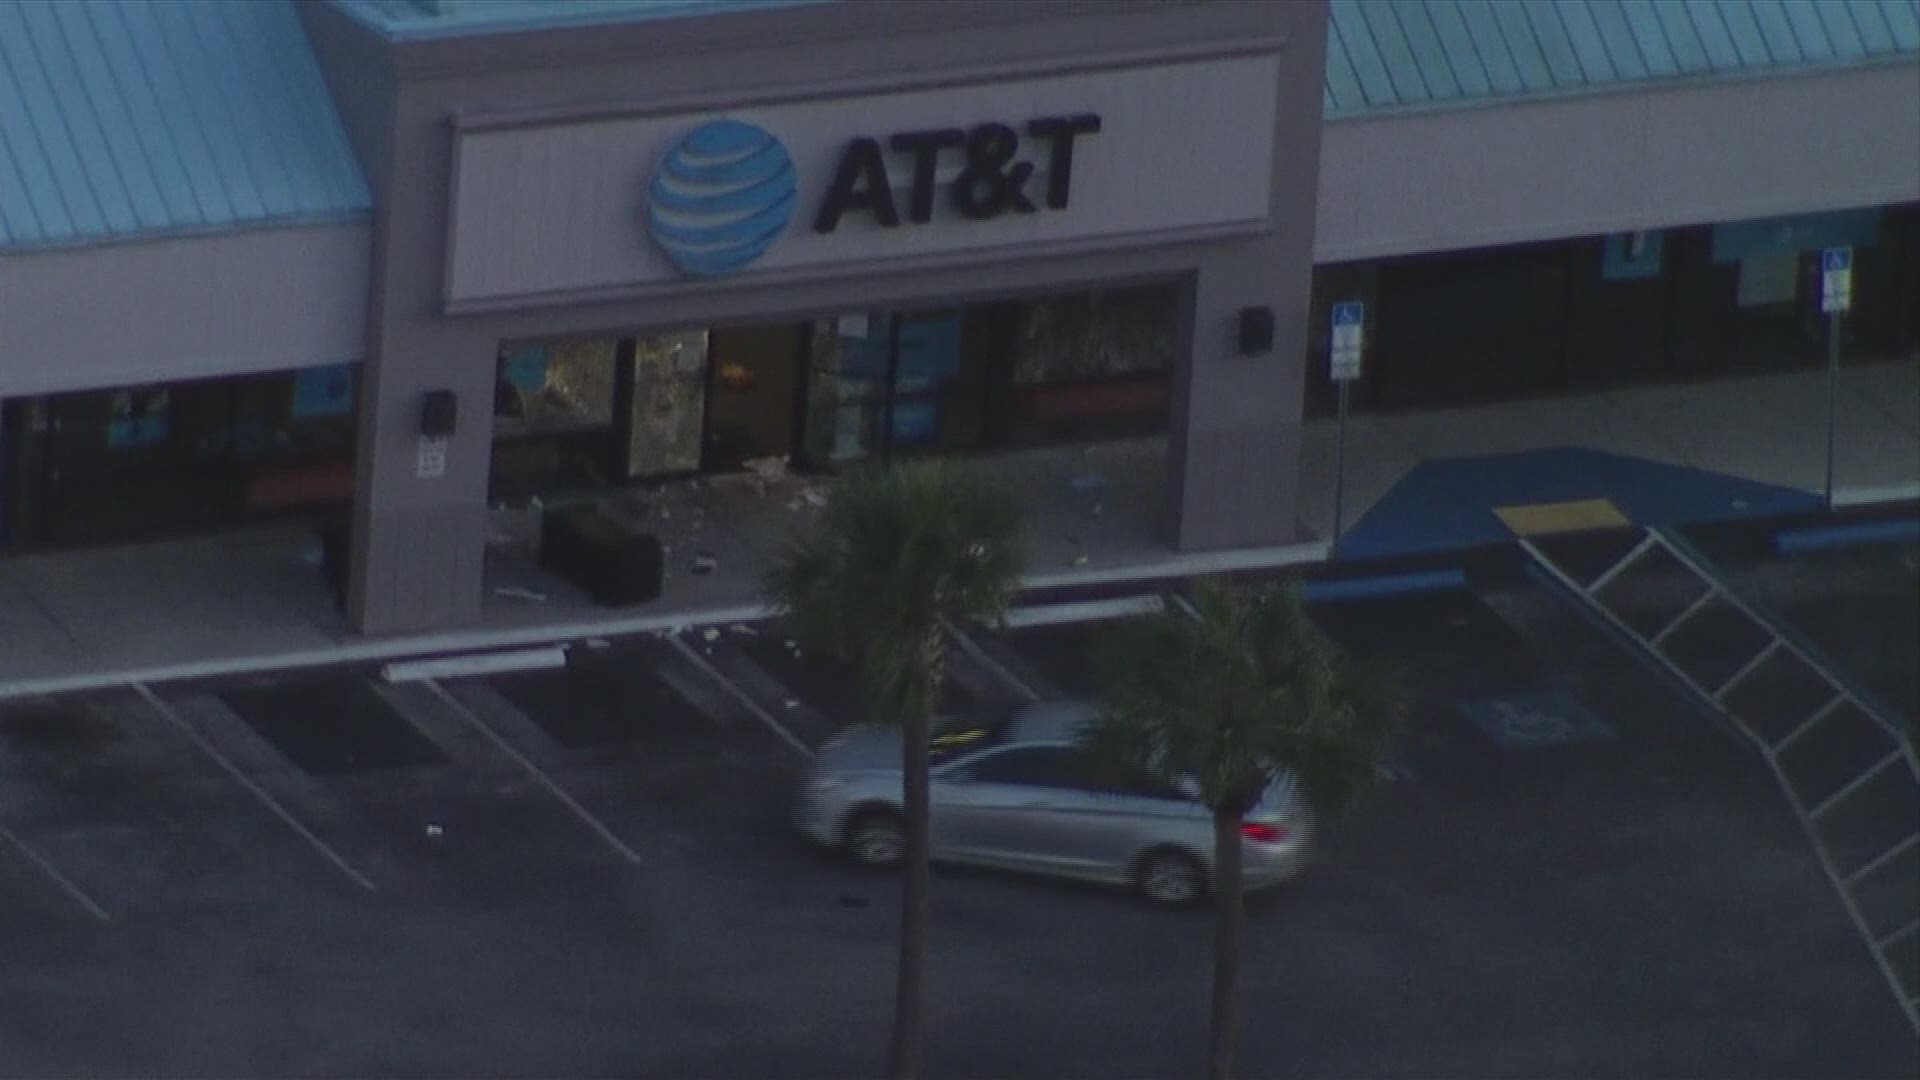 People were seen breaking into an AT&T store on E. Fowler Avenue. Several went inside and appeared to loot the business before officers could make a few arrests.